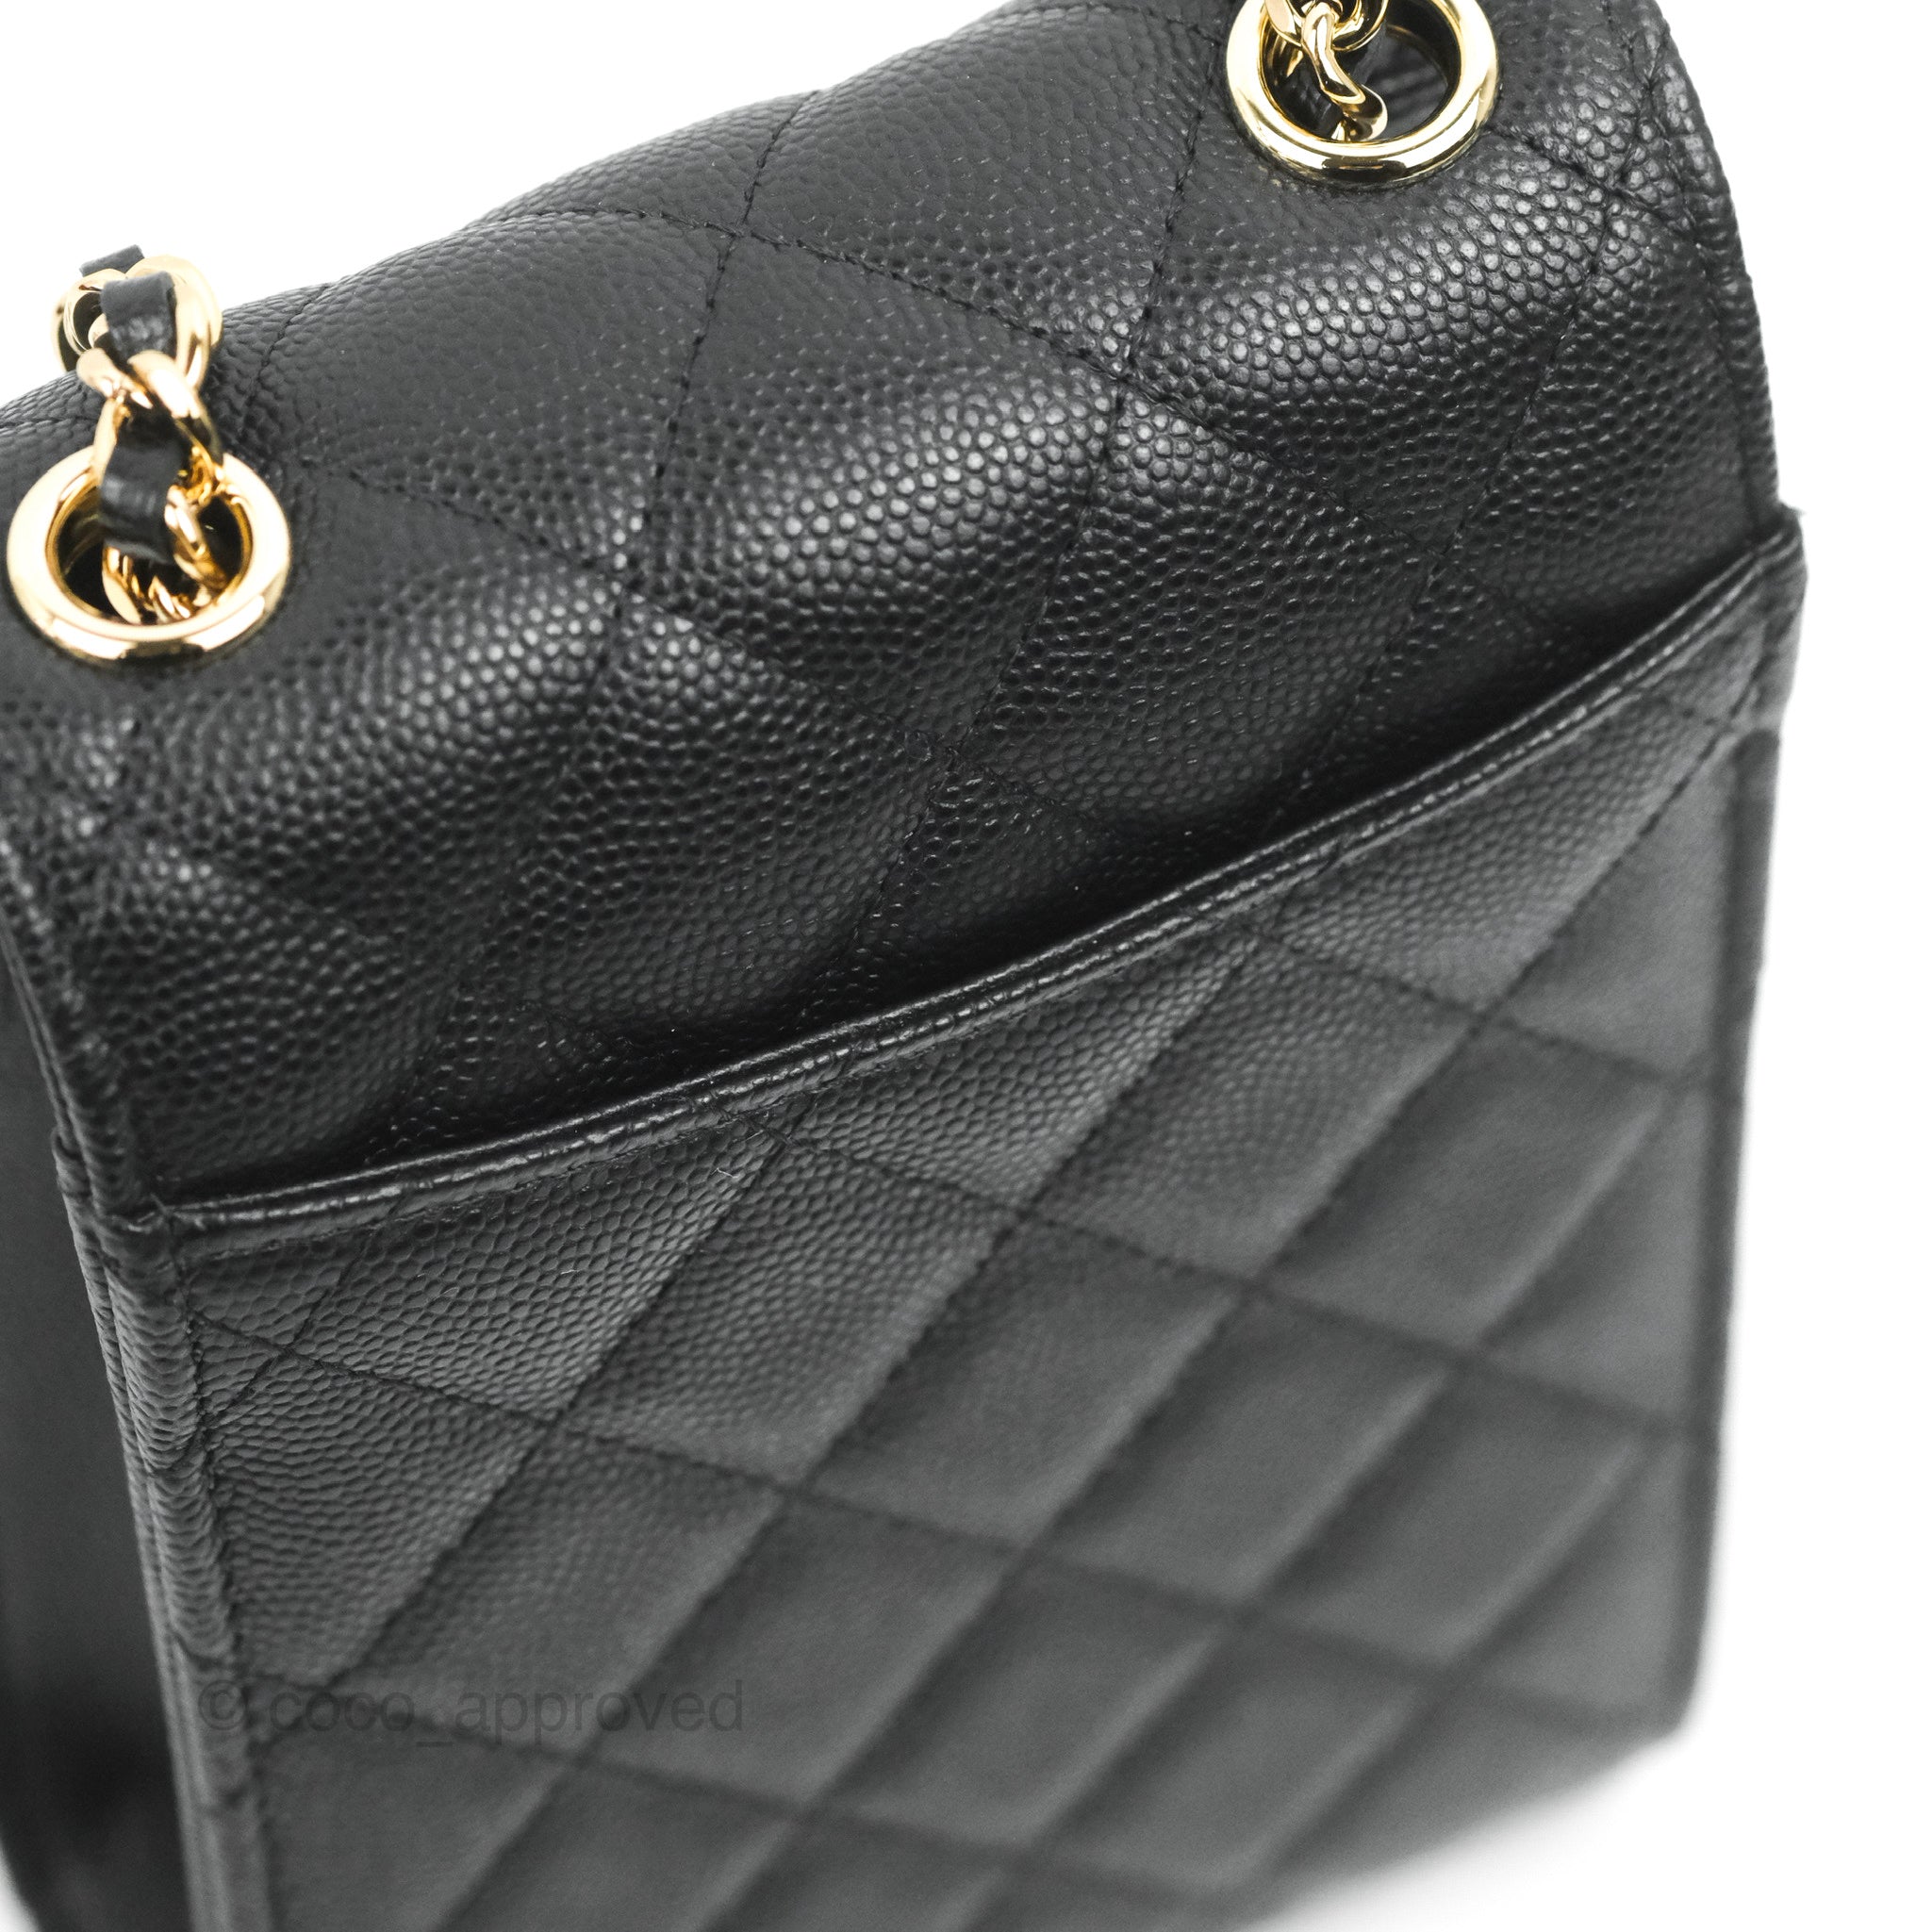 What fits inside the Chanel Classic iPhone Holder in black Caviar